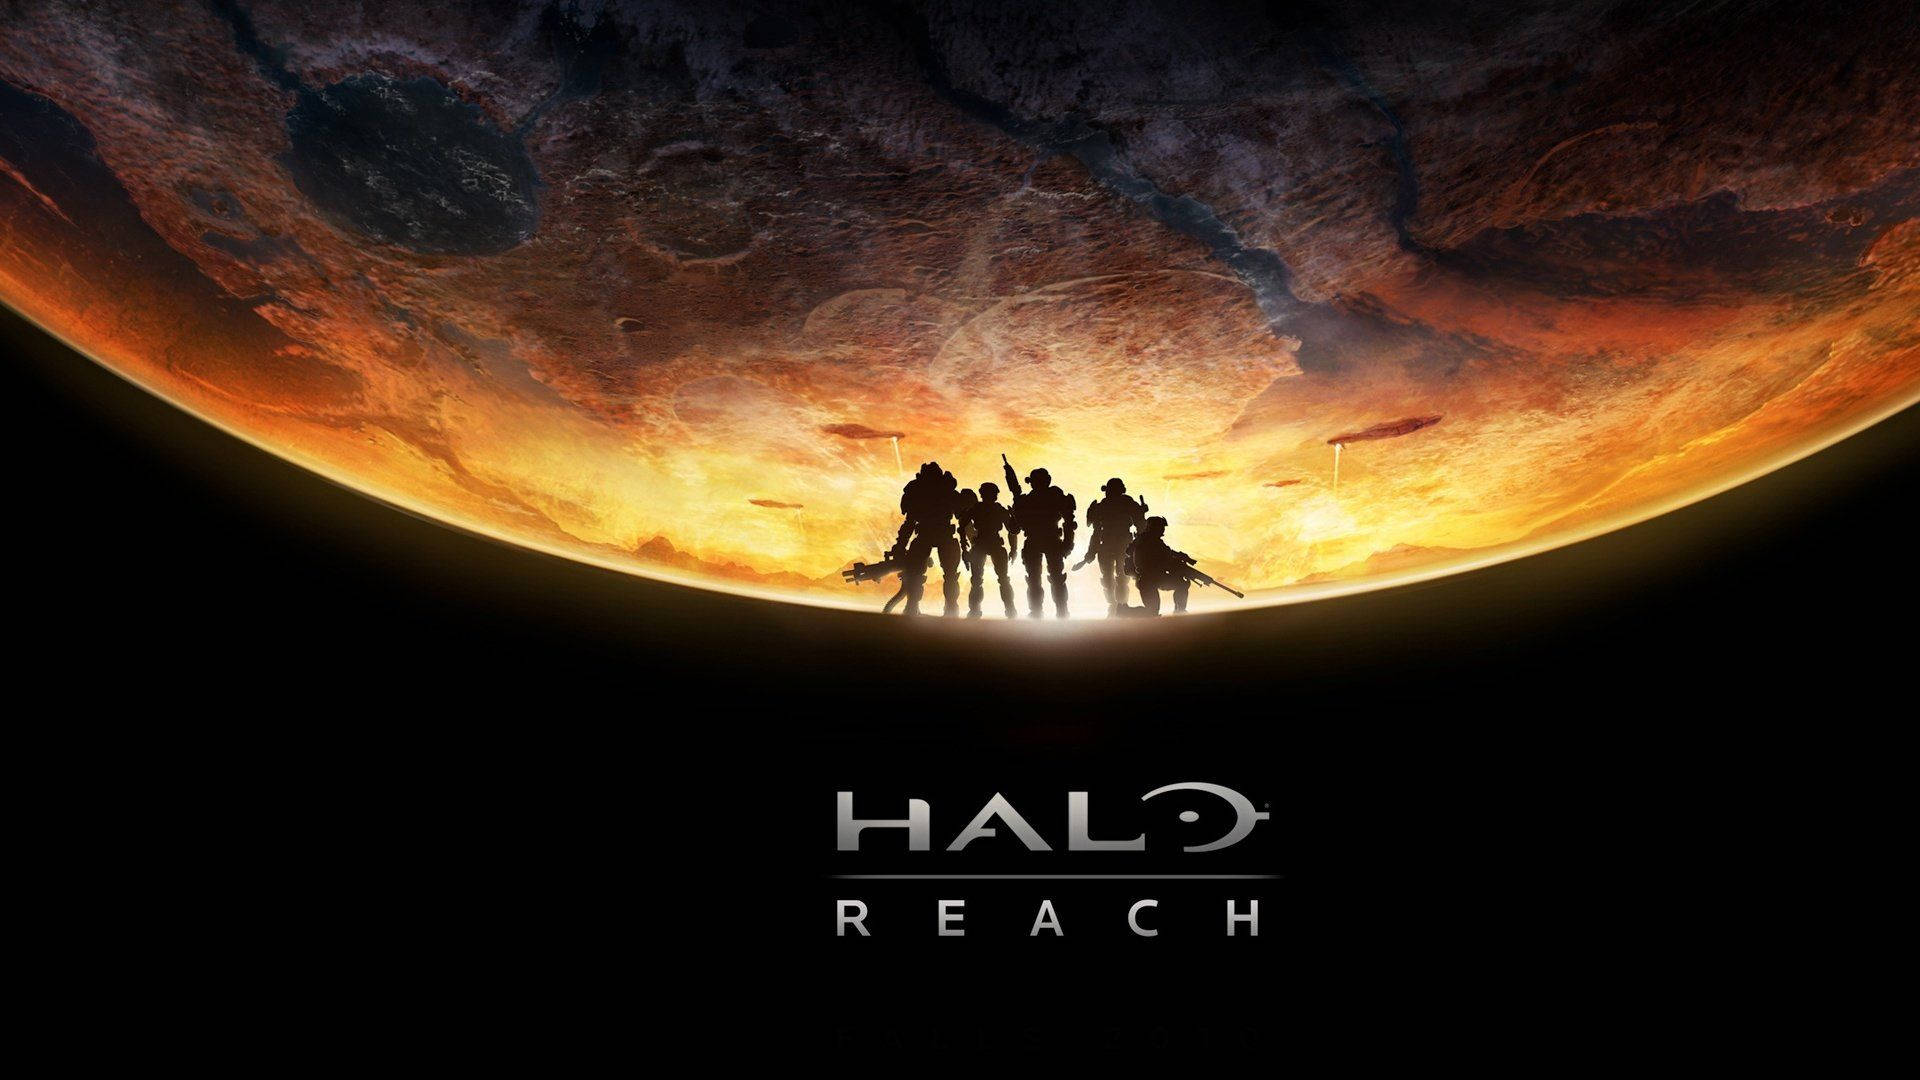 An Epic moment in the Halo Reach Video Game Wallpaper